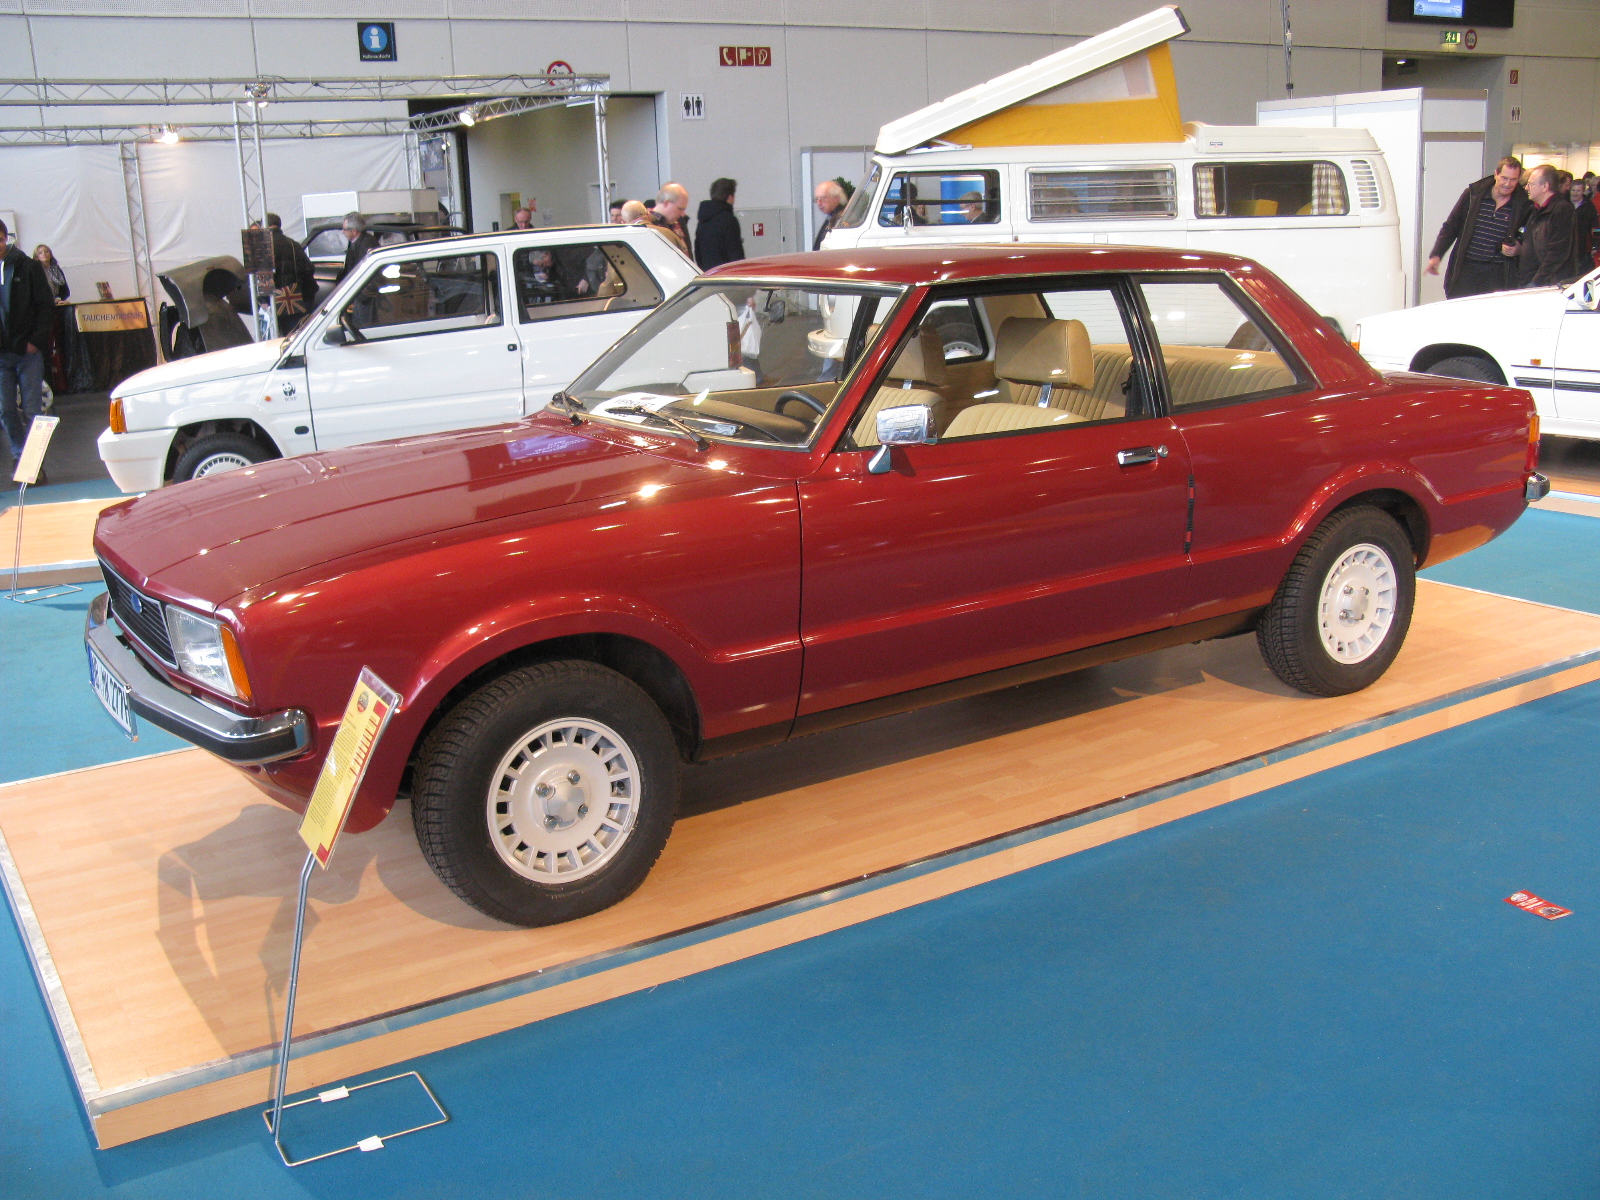 a maroon sports utility wagon on display at an automobile show